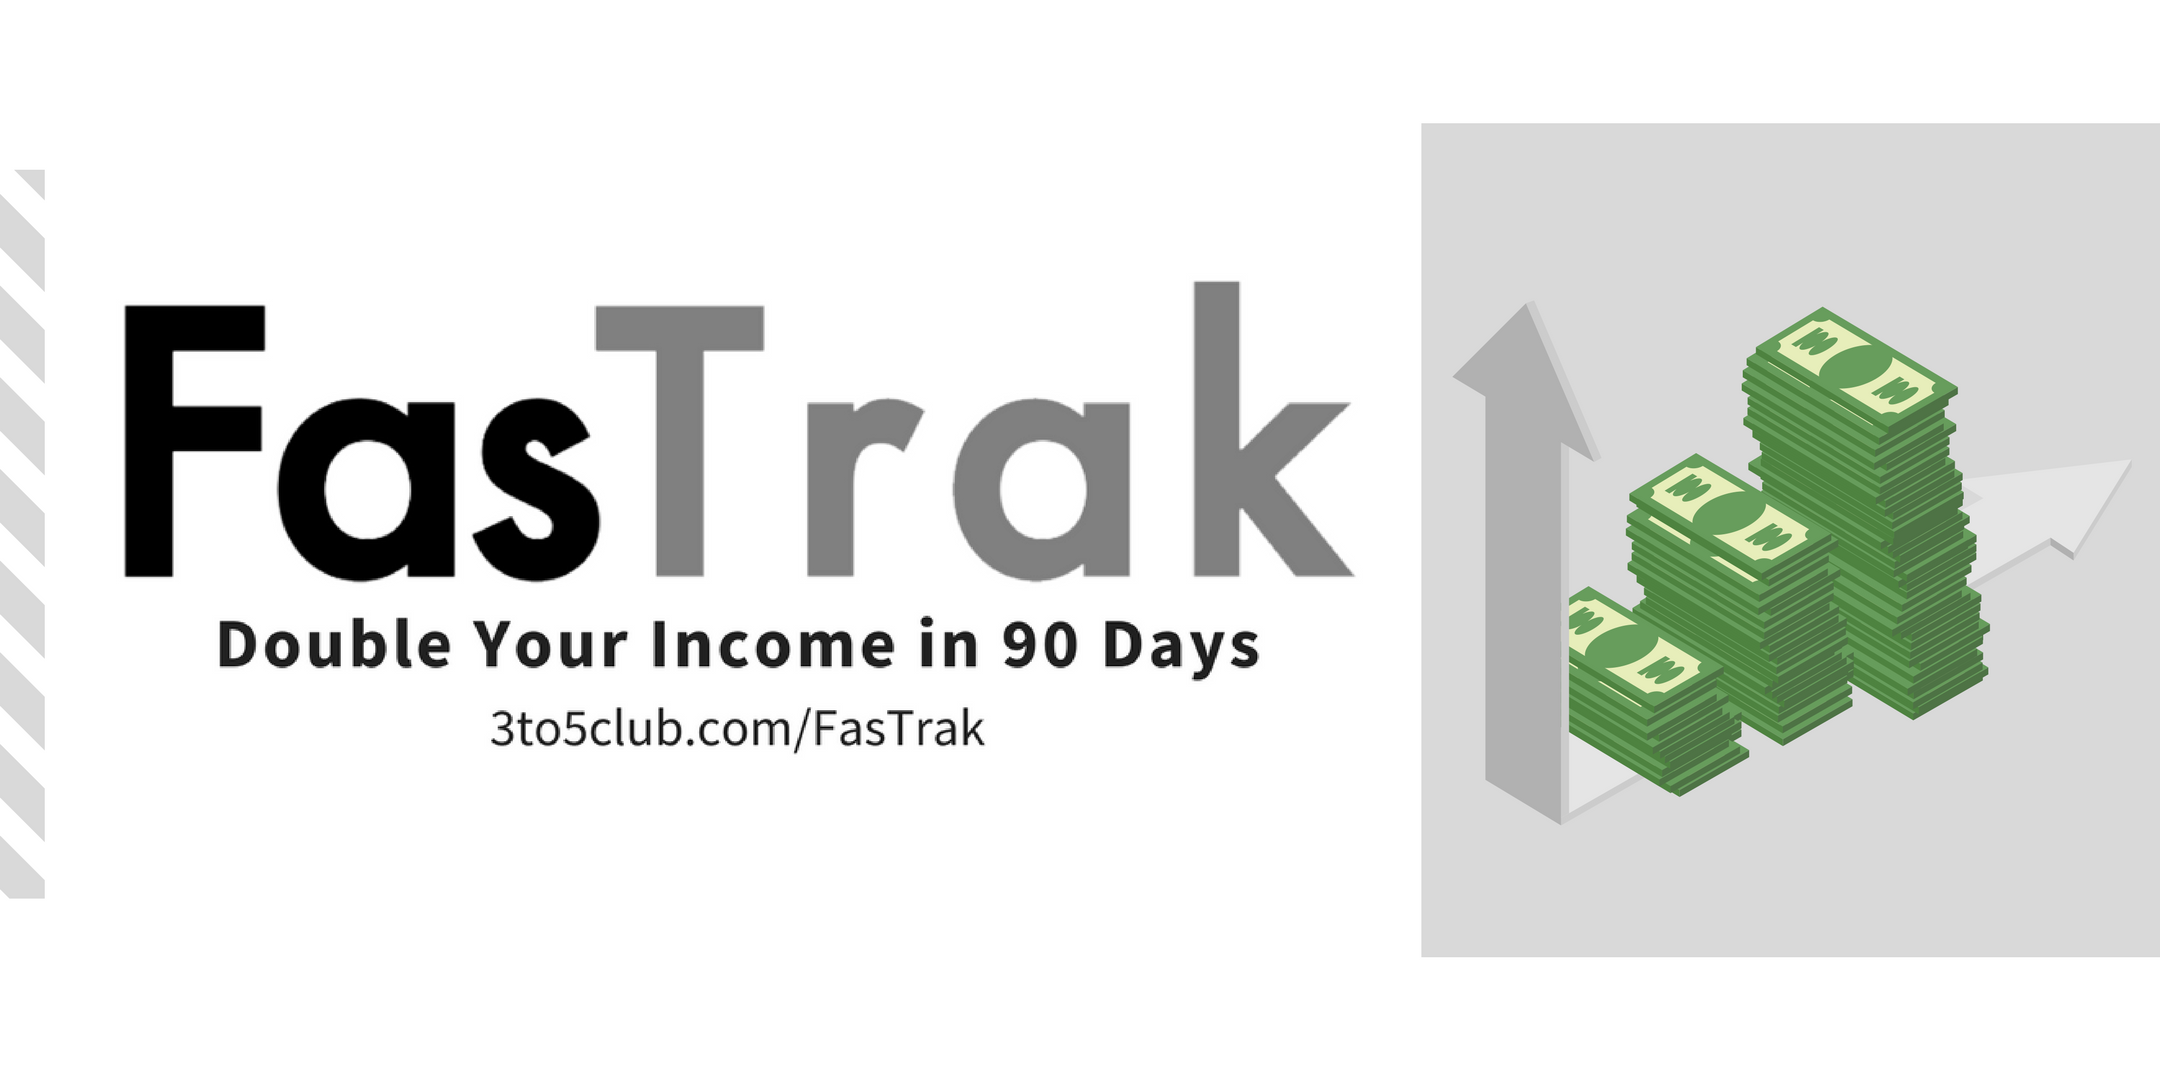 FasTrak: 90 Day Double Your Income Challenge March 2020